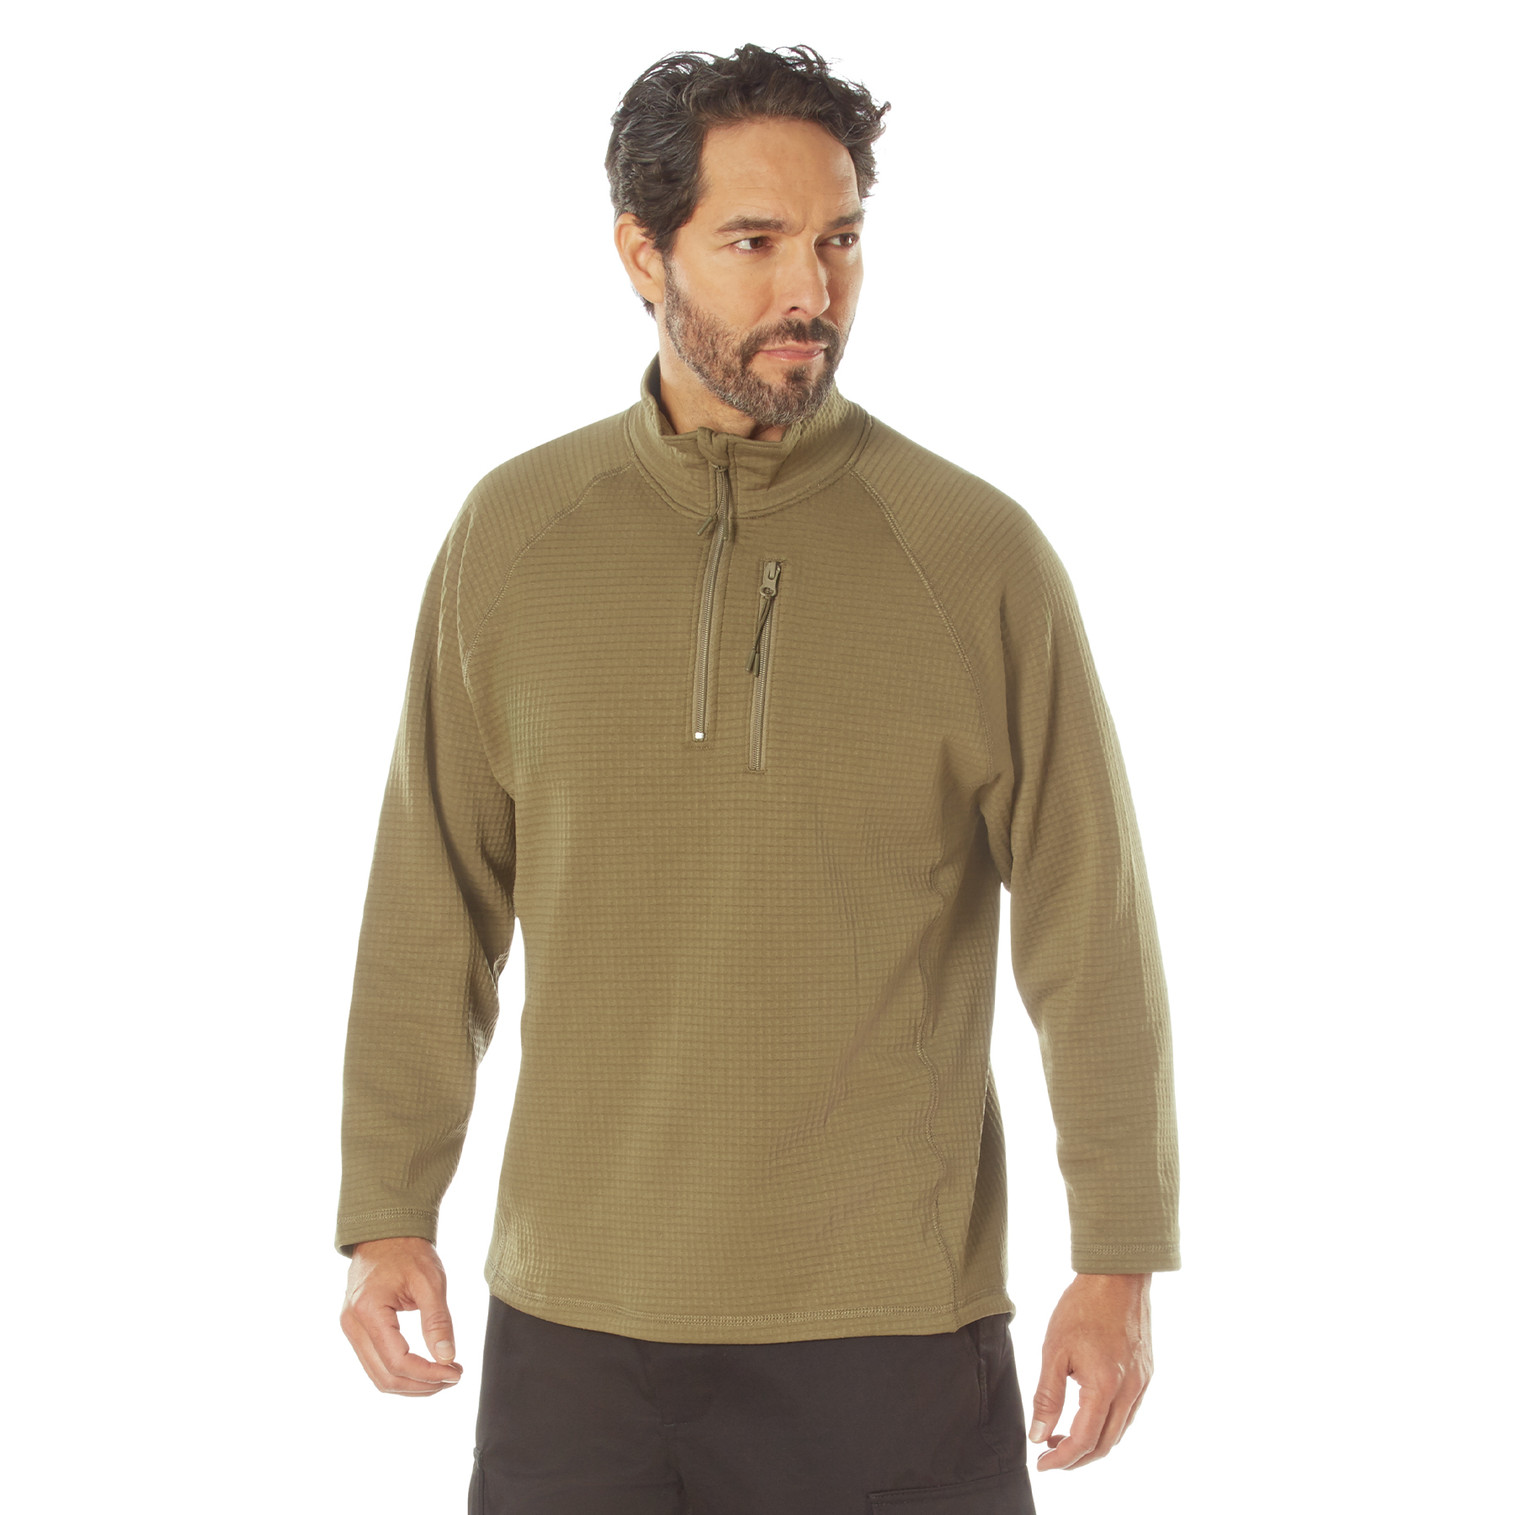 Rothco Grid Fleece Pullover - Coyote Brown